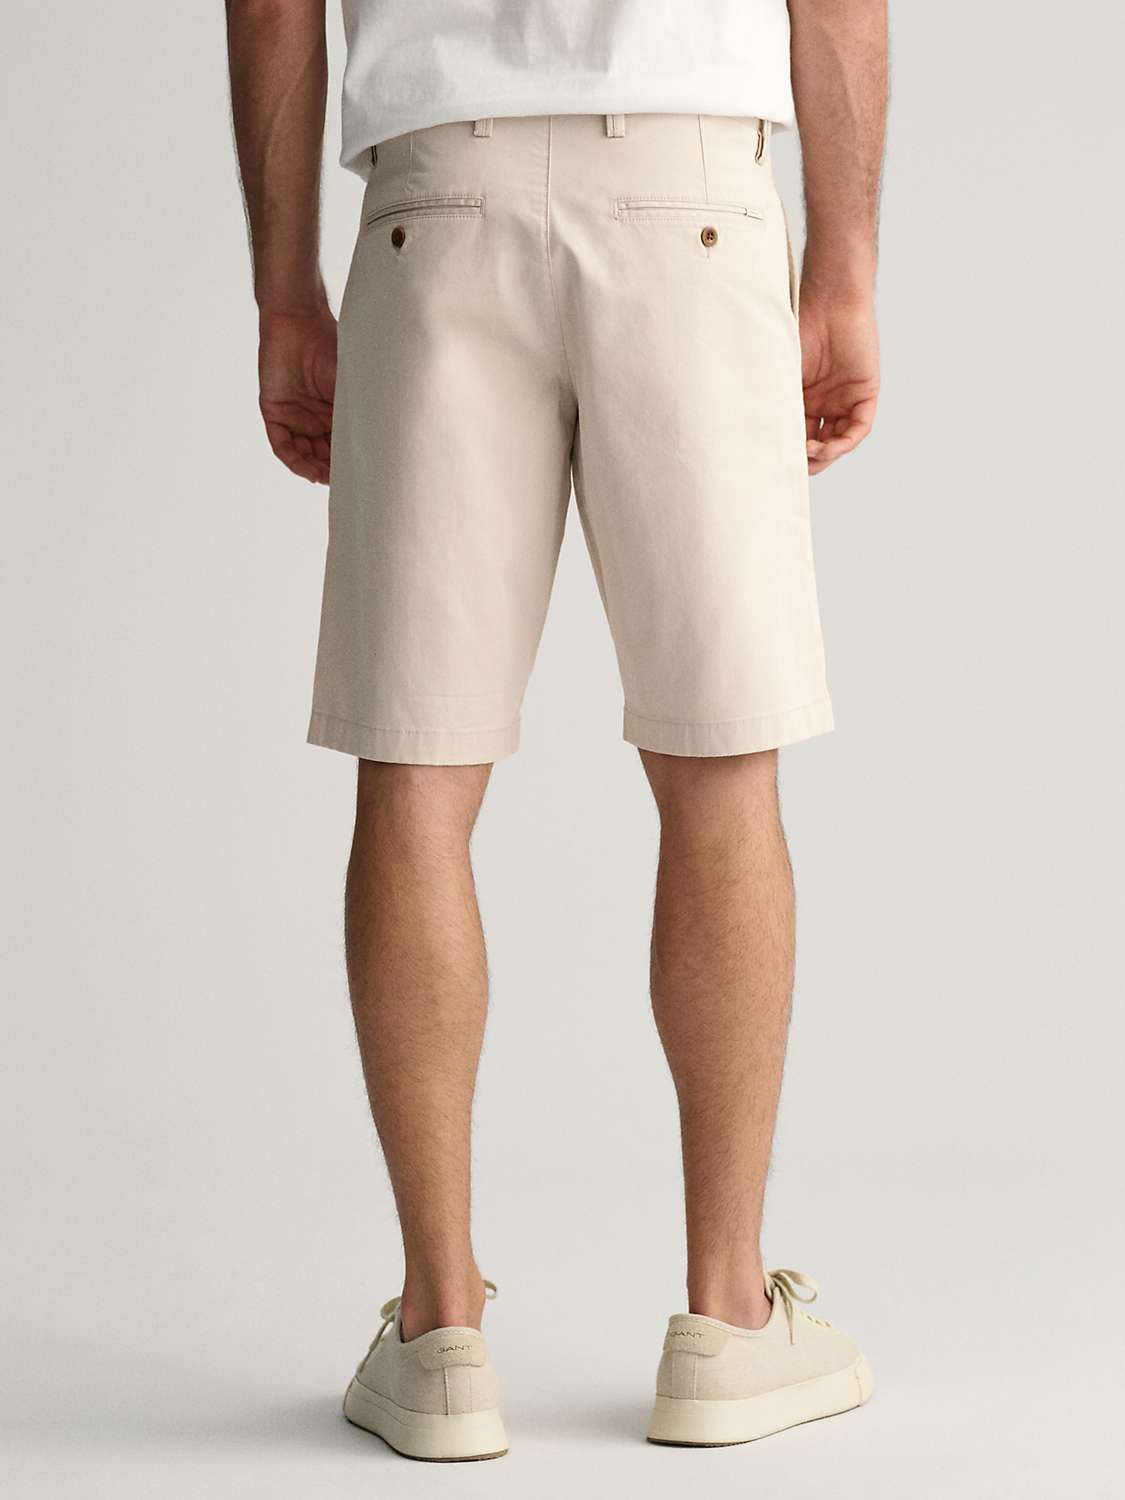 Buy GANT Relaxed Twill Shorts, Putty Online at johnlewis.com